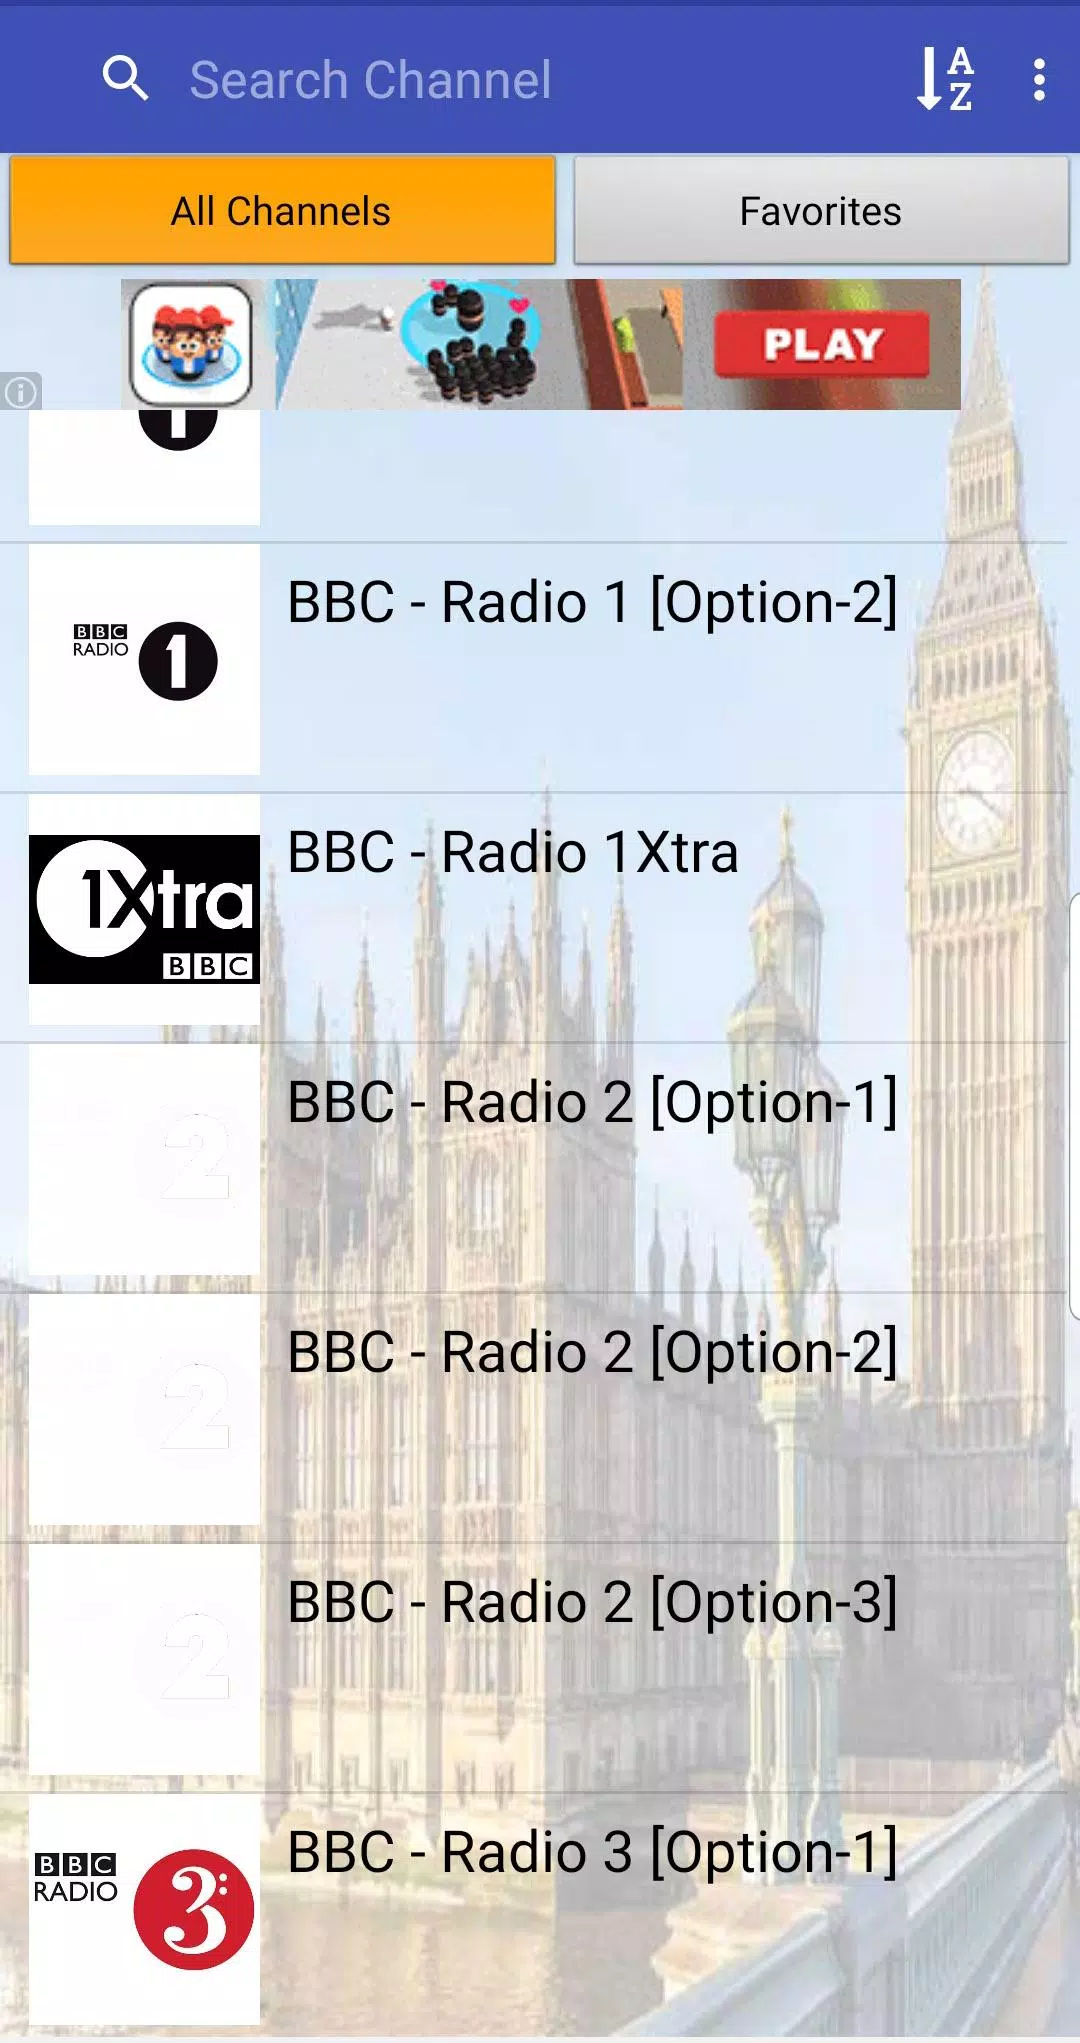 UK TV & Radio APK for Android Download